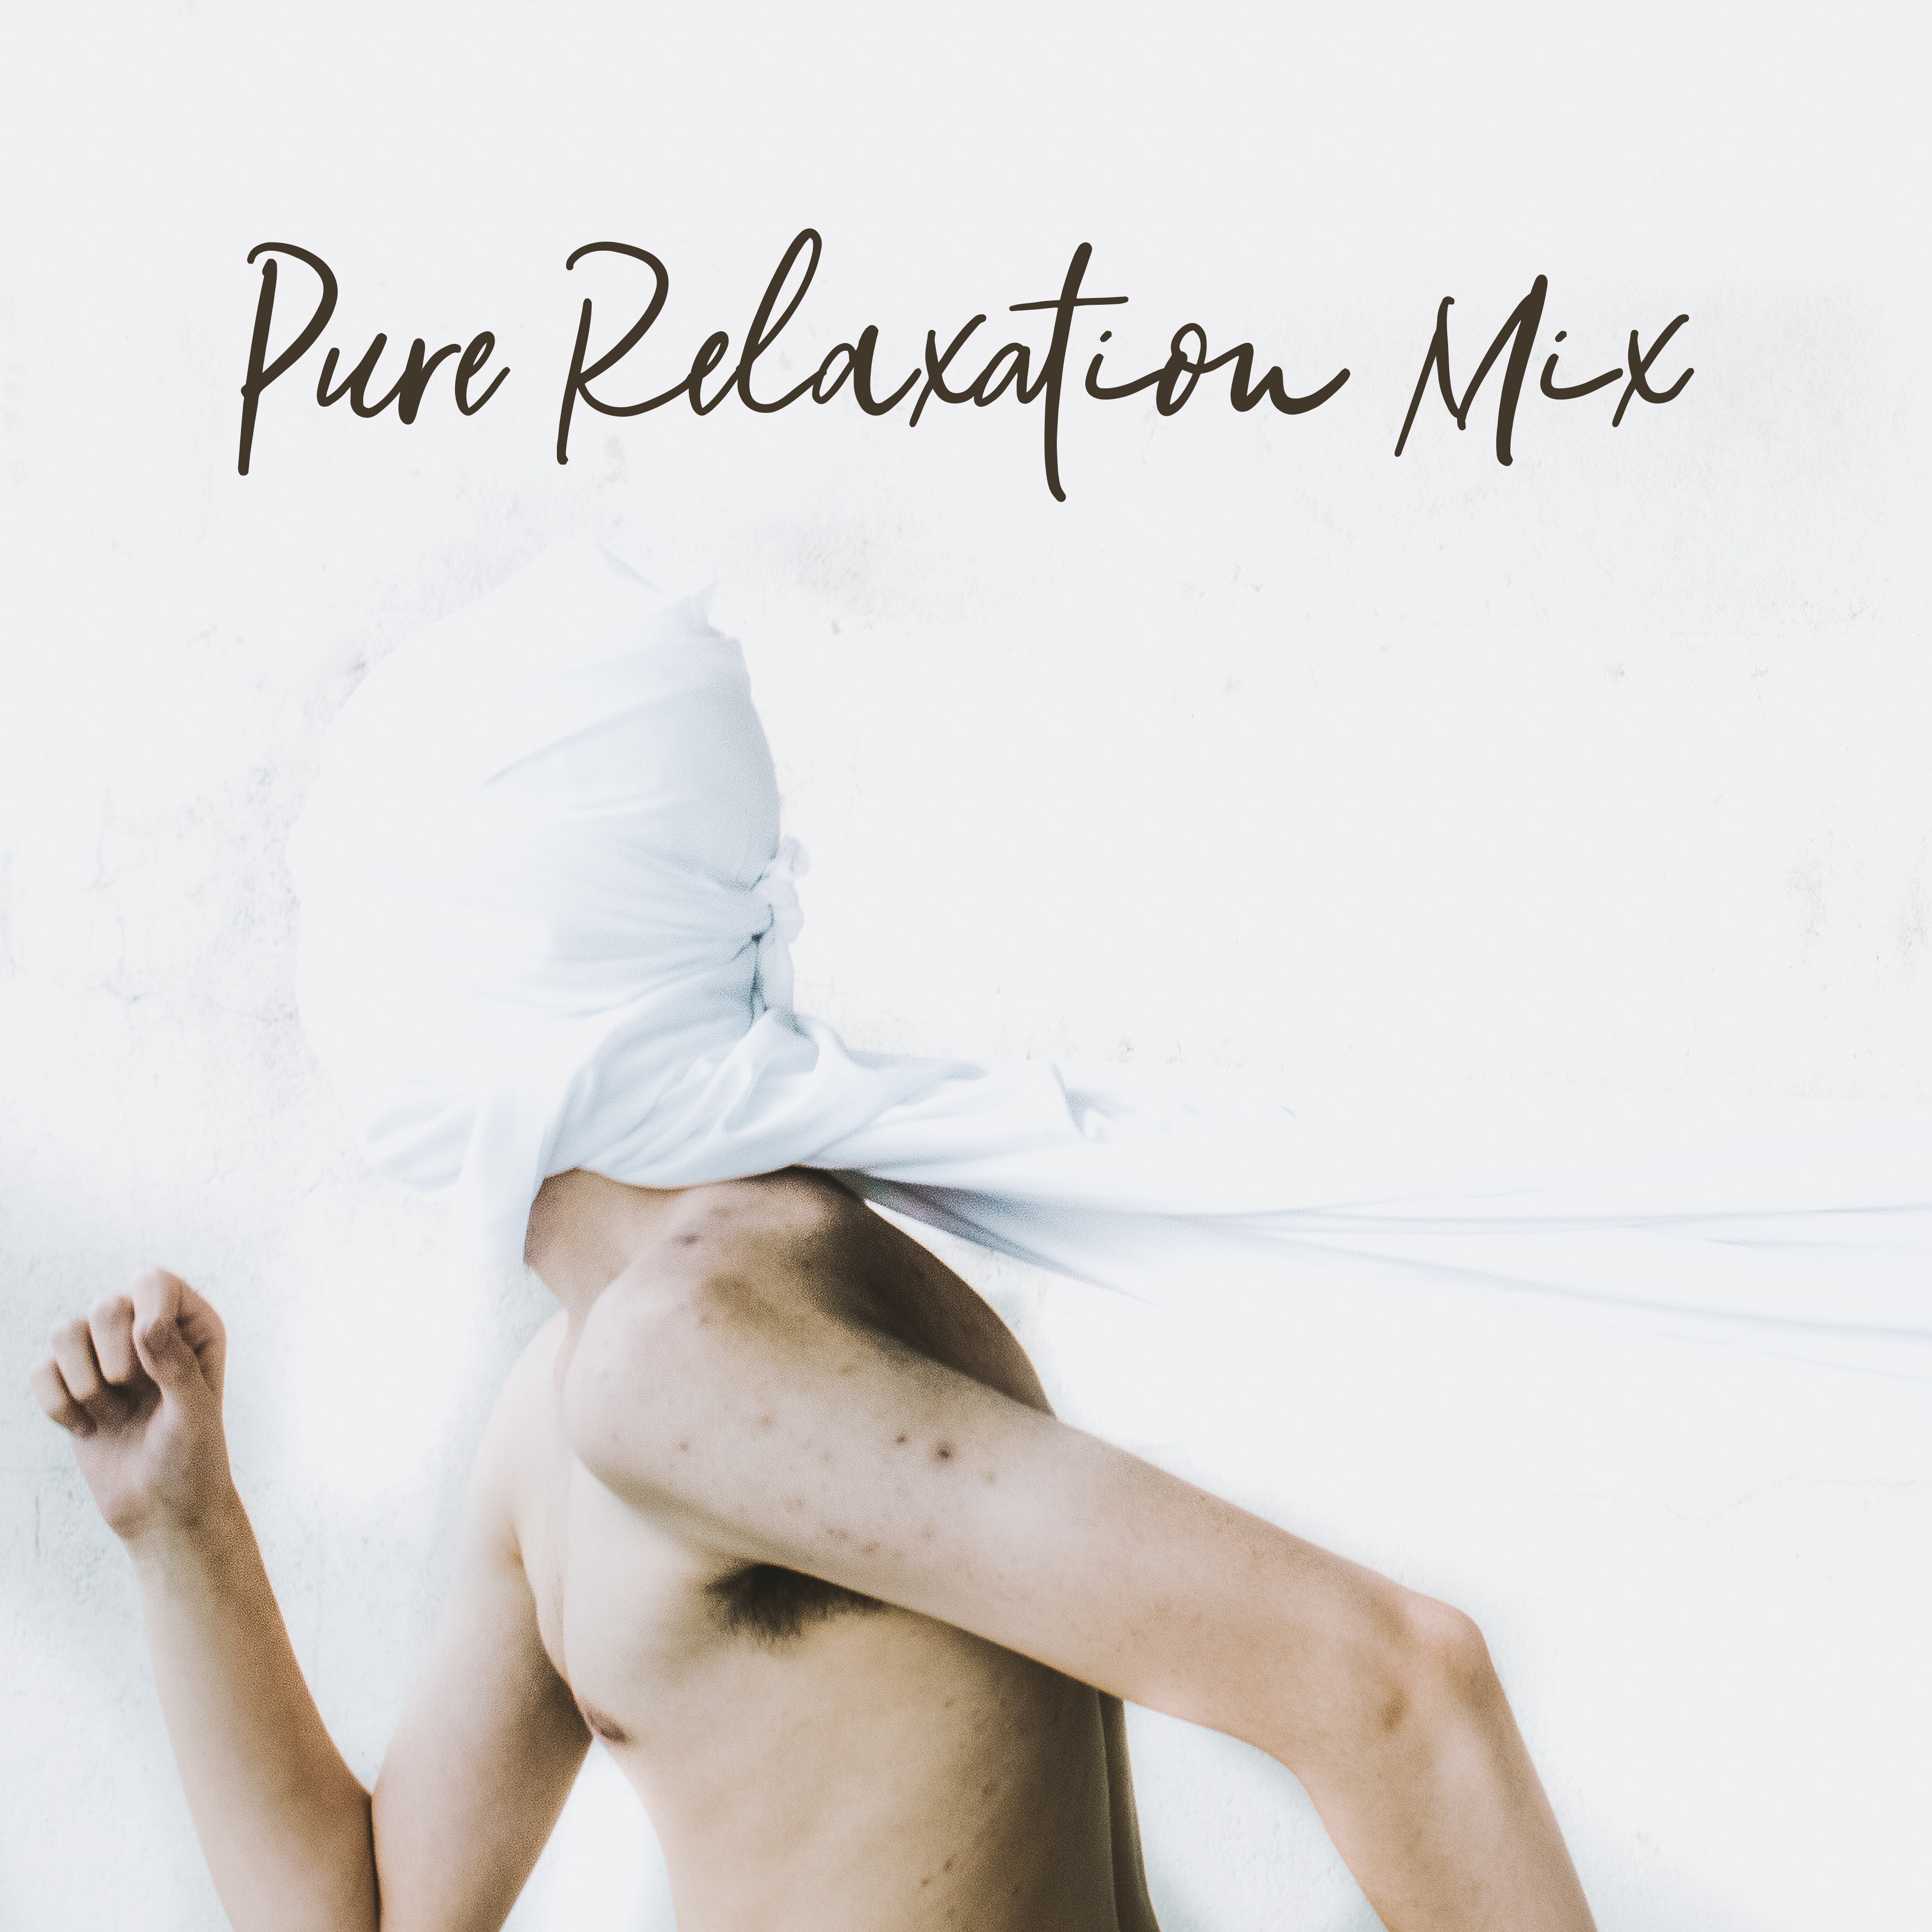 Pure Relaxation Mix – Meditation Therapy, Deep Harmony, Relaxing Music to Calm Down, Zen Serenity, Total Chill